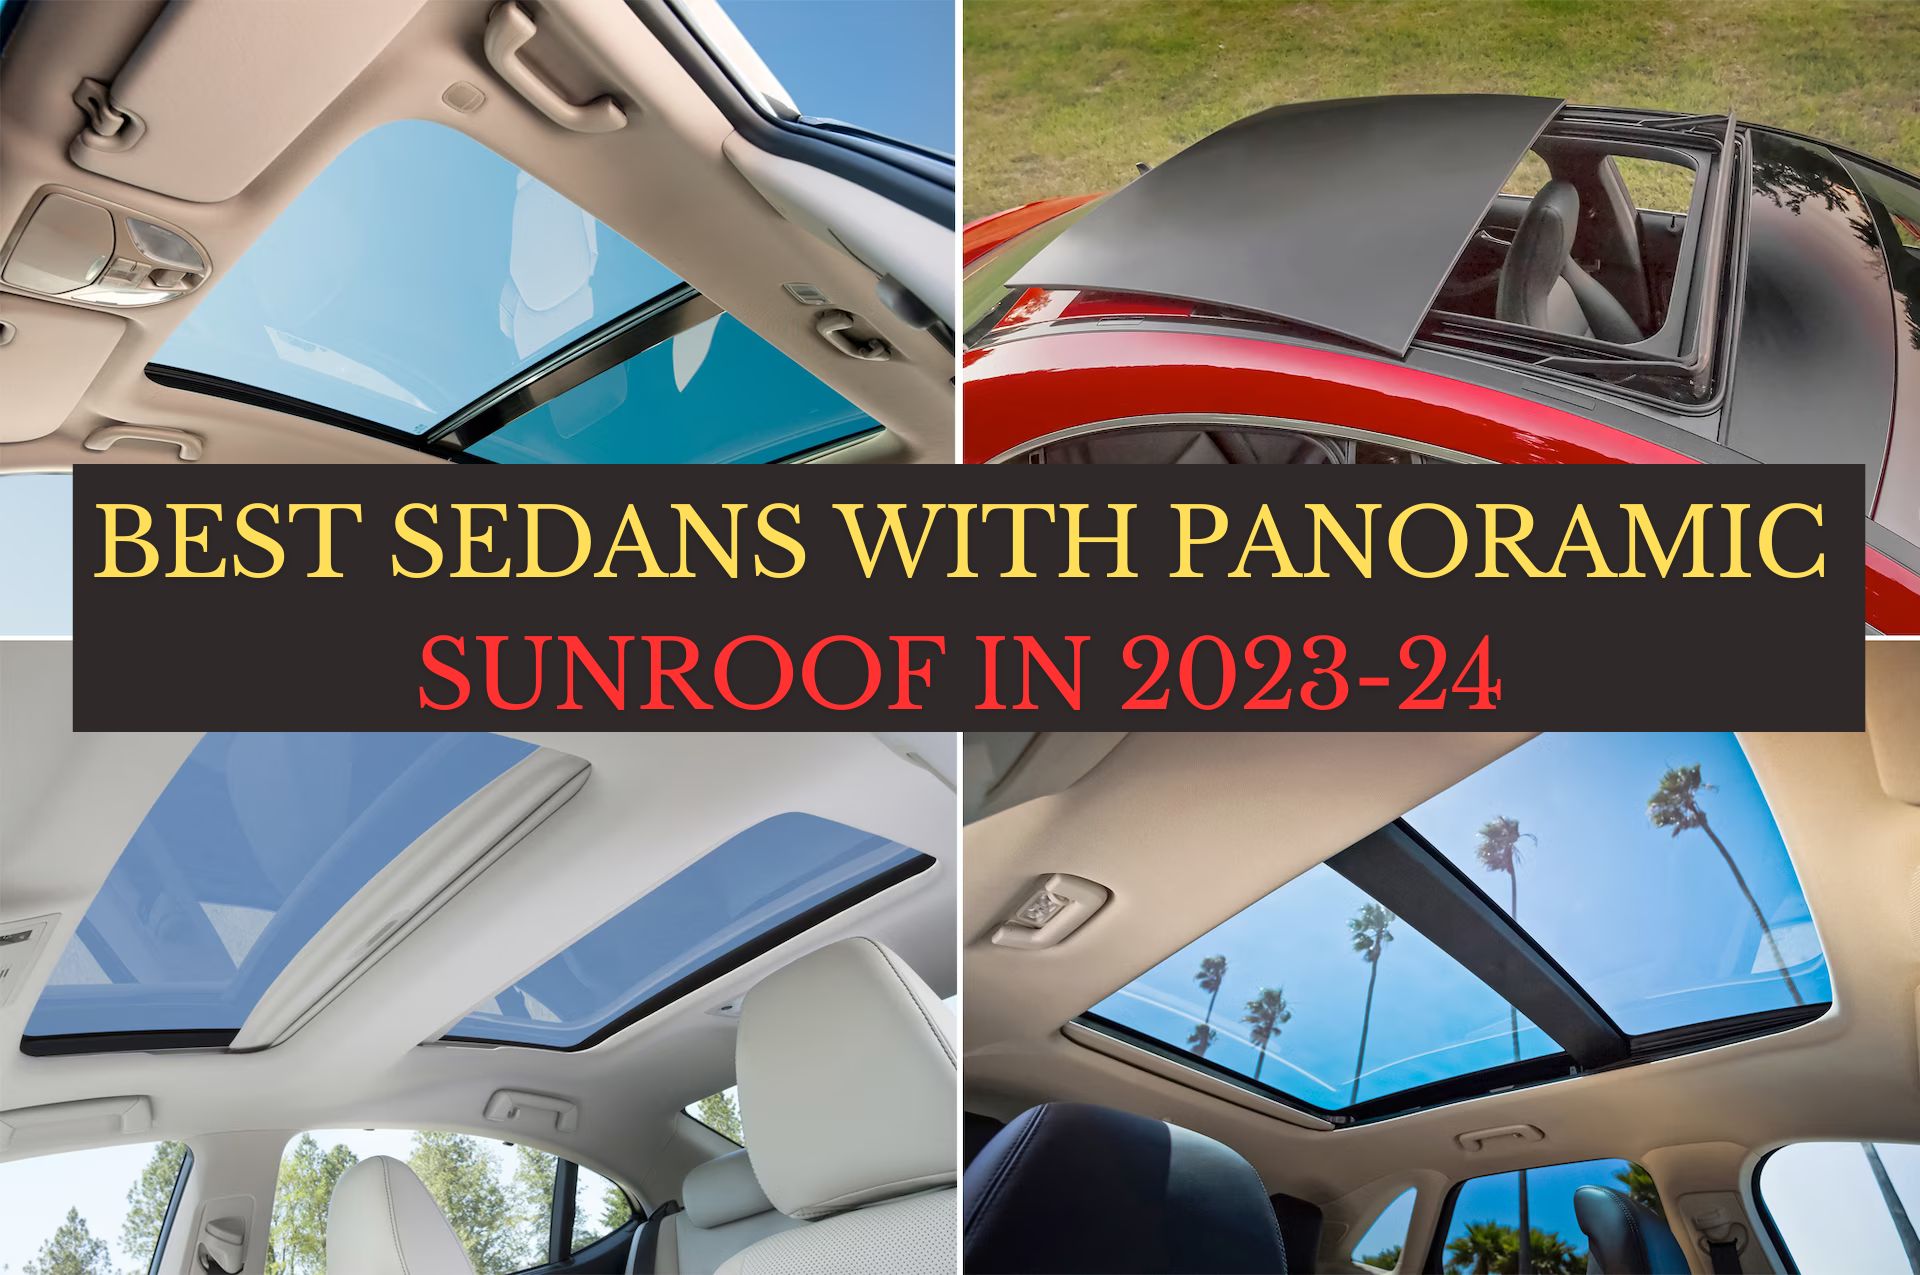 Best Sedans With Panoramic Sunroof In 2023-24